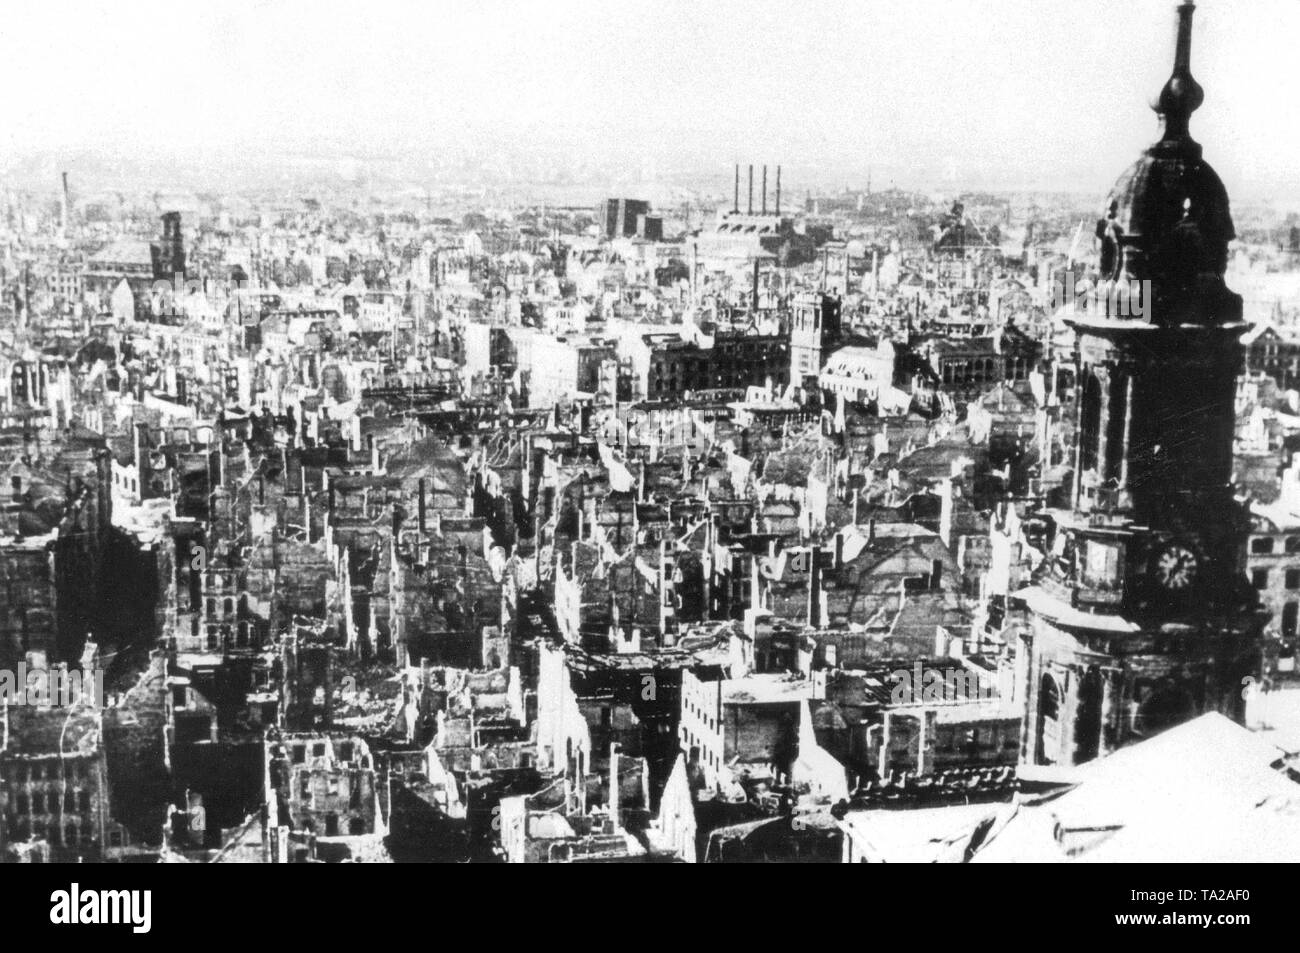 The bombing of Dresden by the British Royal Air Force (RAF) and United States Army Air Force (USAAF) took place between February 13 and February 15, 1945, Stock Photo